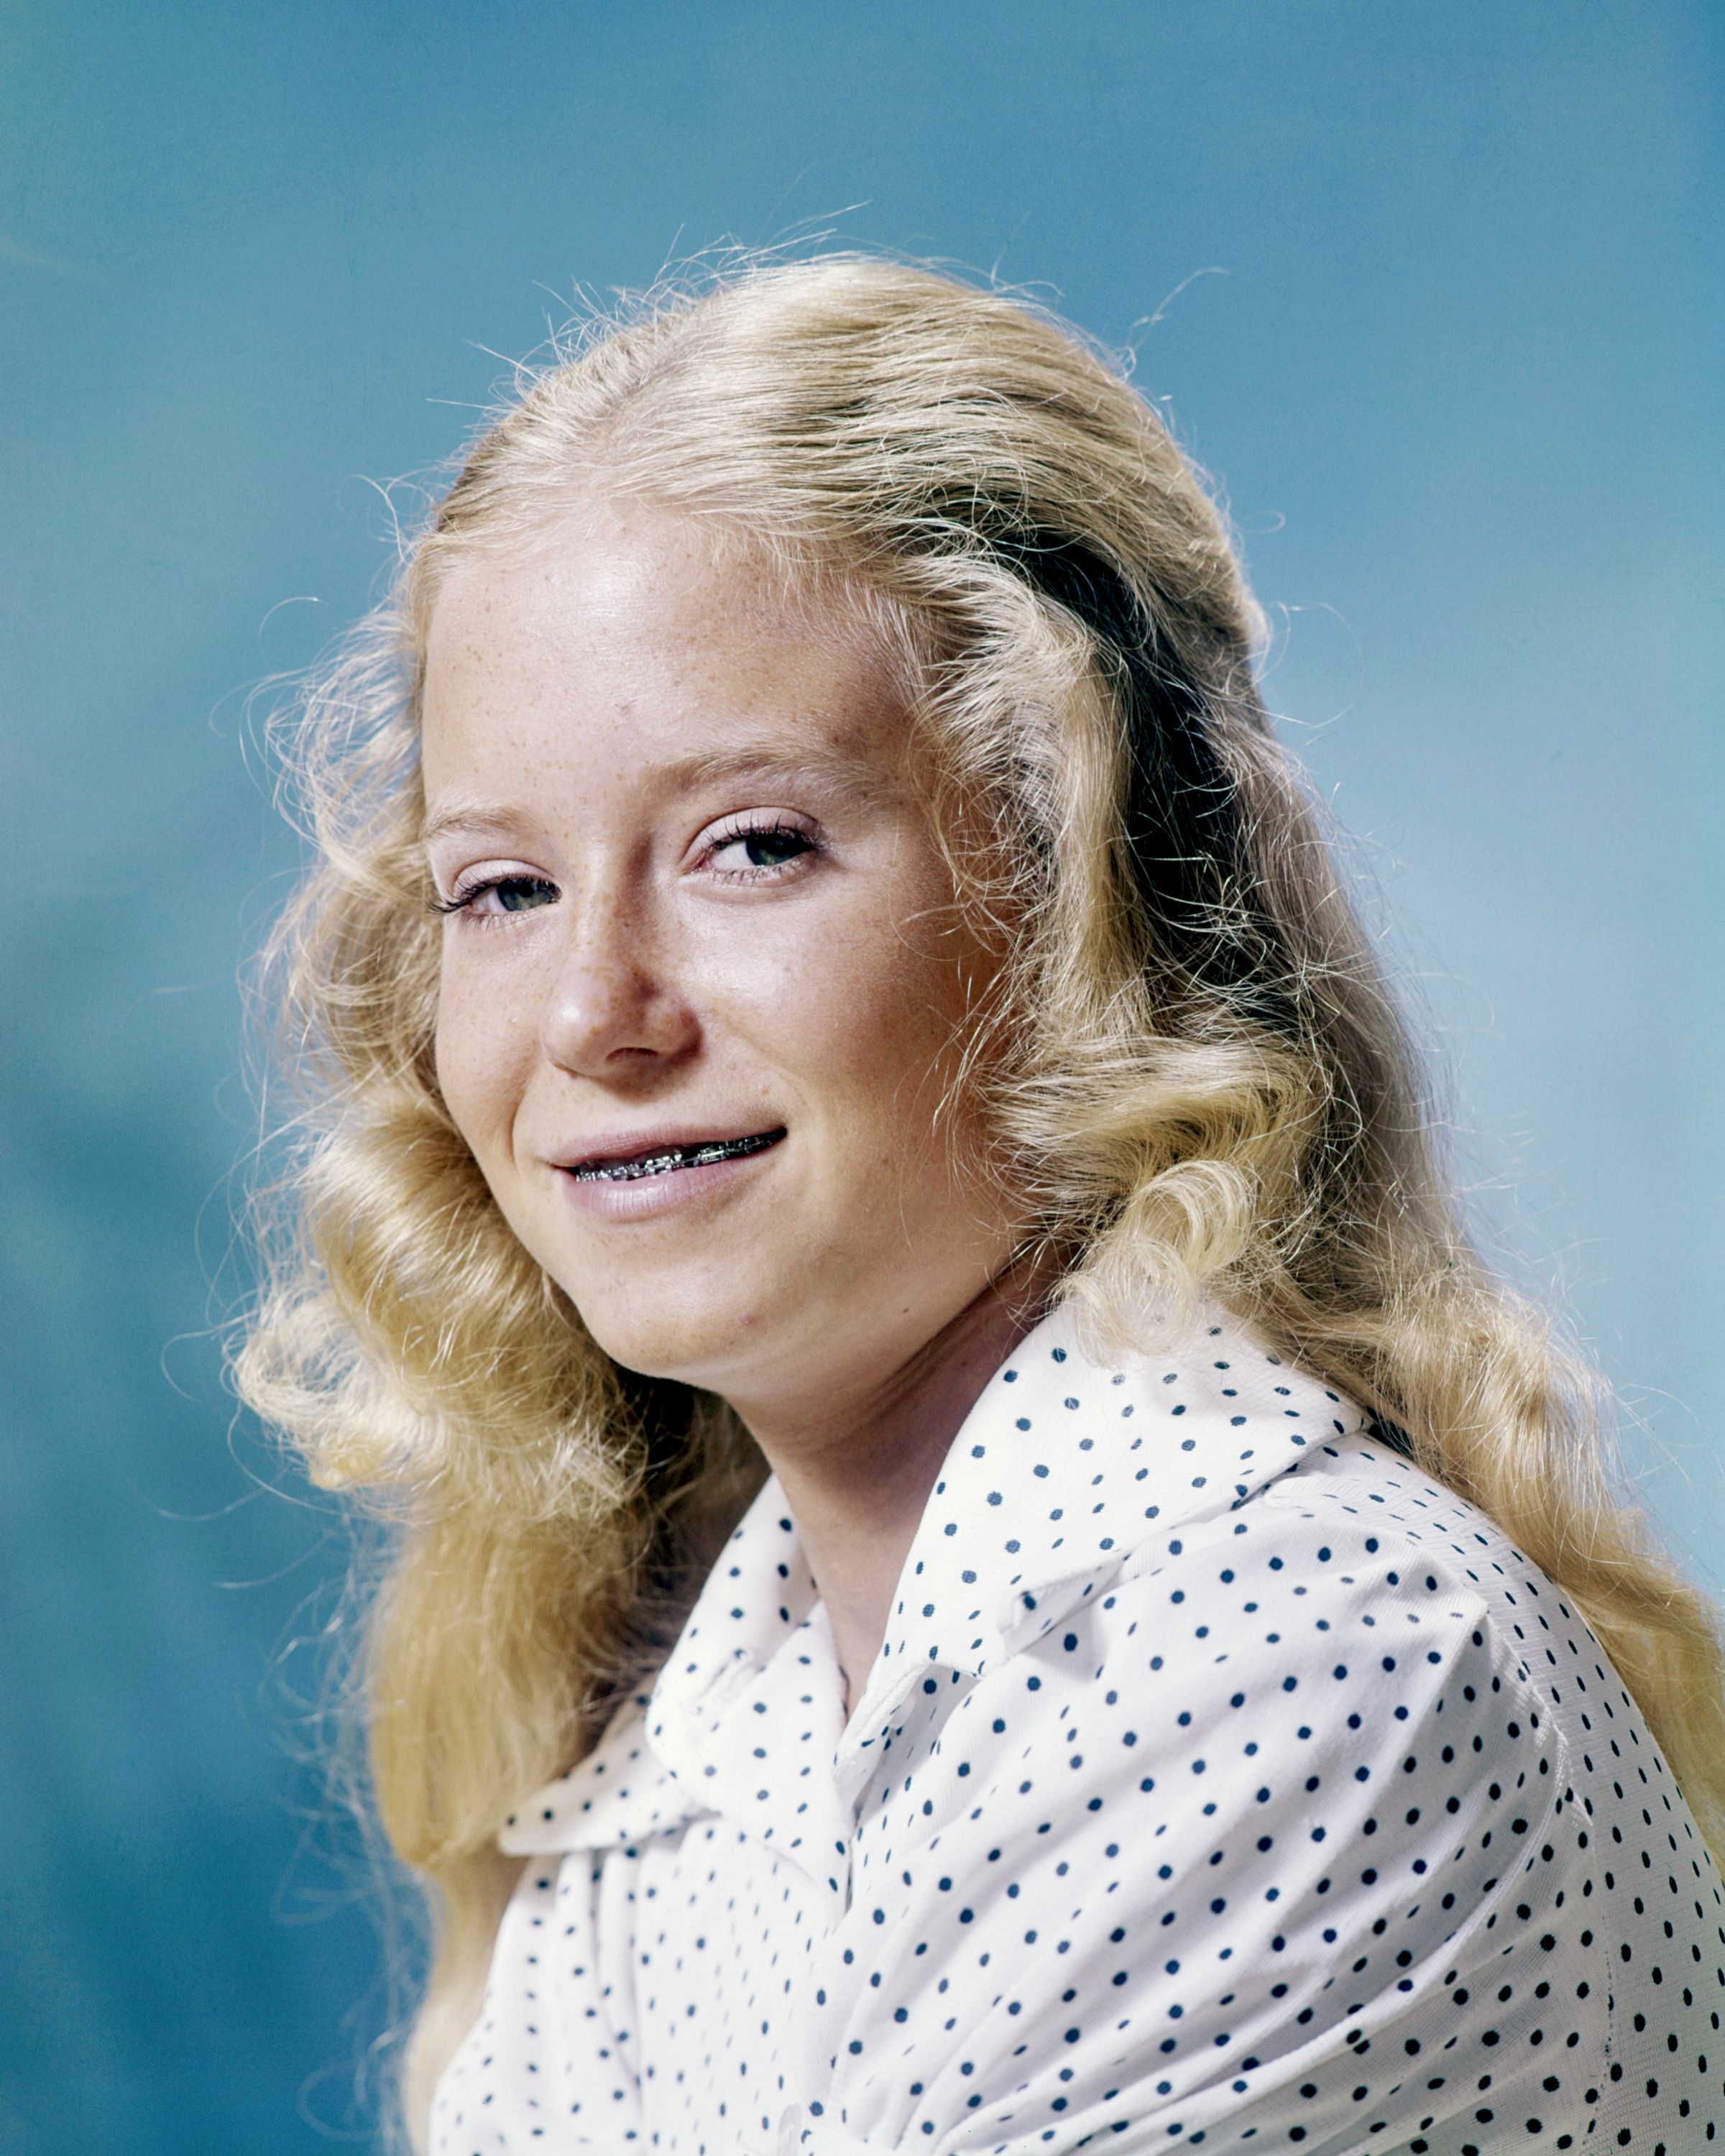 Eve Plumb, circa 1972. Plumb is best known for playing Jan Brady in the American TV series 'The Brady Bunch'. | Source: Getty Images